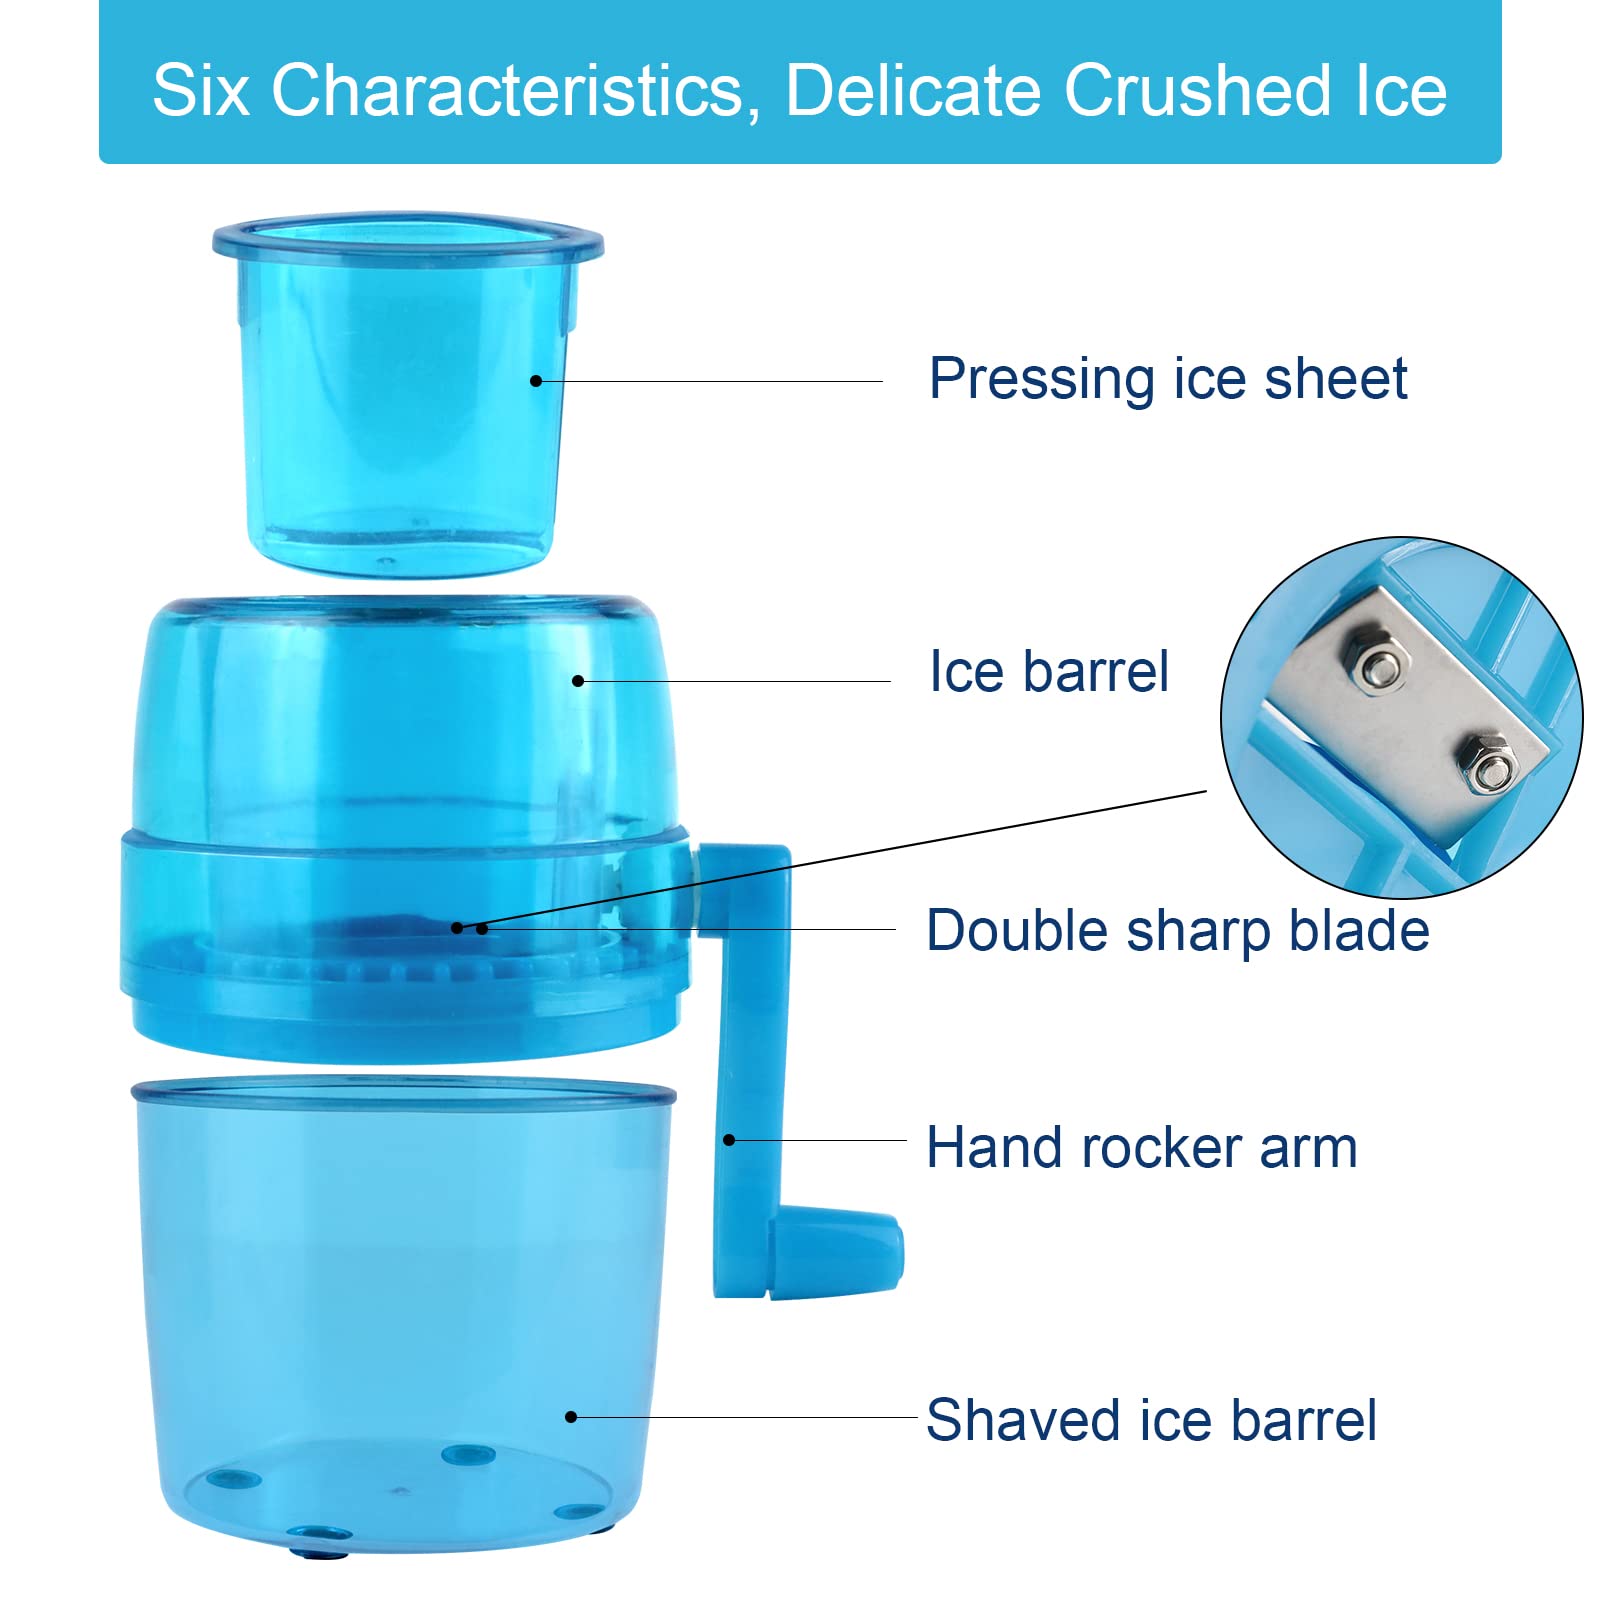 Hand Crank Ice Crusher,Snow Cone Machine Household Mini Portable Ice Shaver with Stainless Steel Blade Manual Ice Crusher for Snow Cone, Slush, Shaved Ice(Blue)